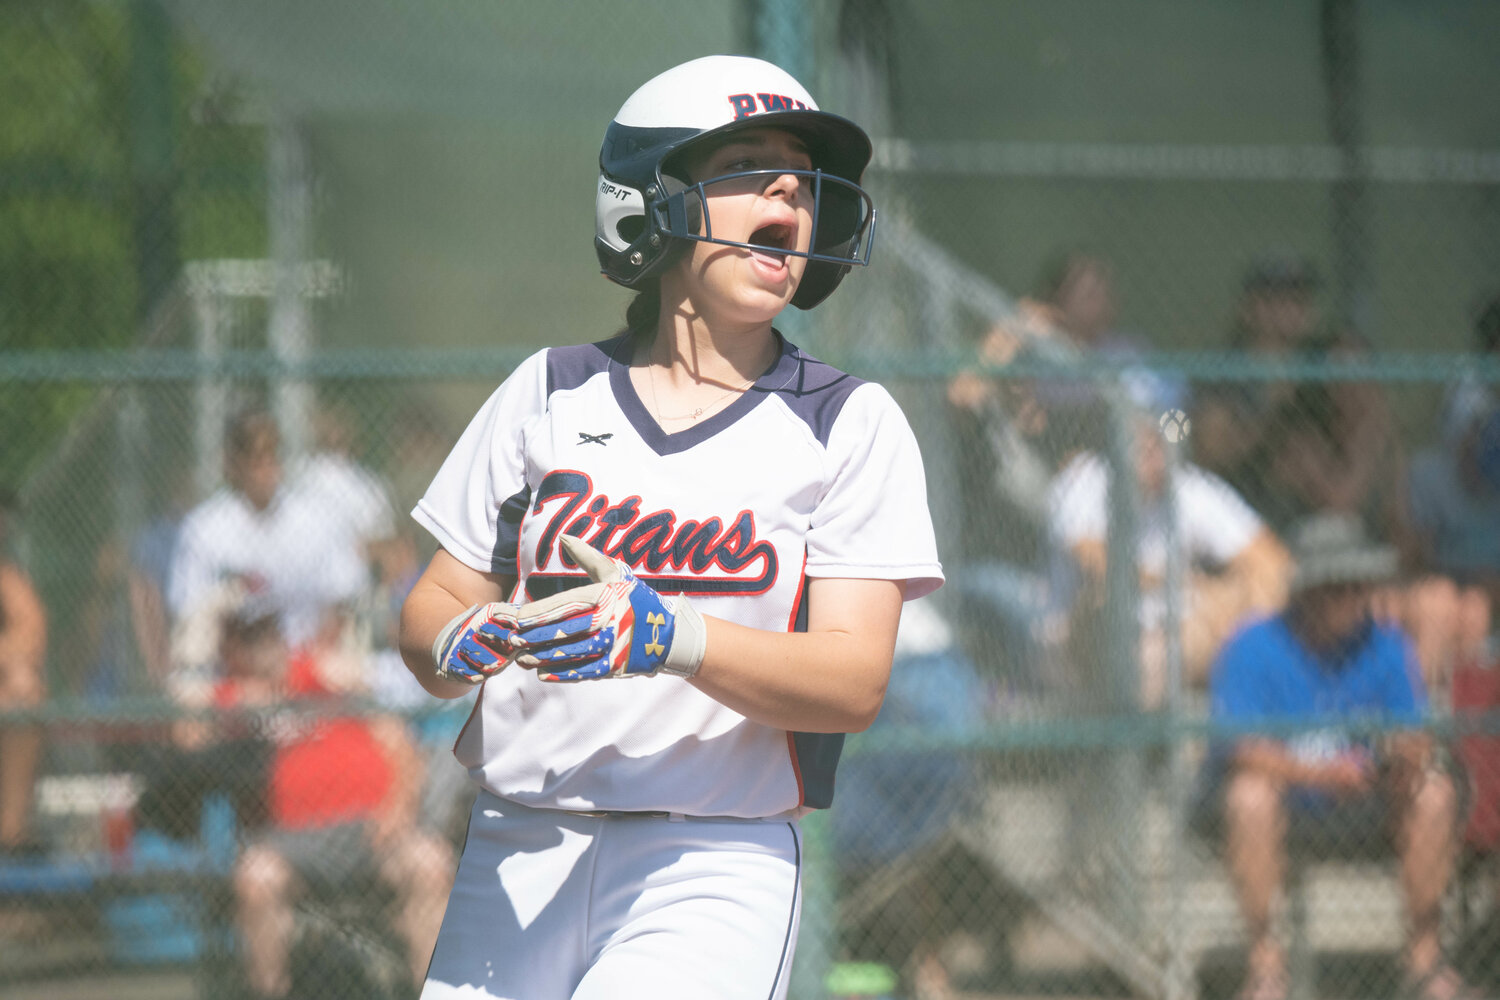 Lorelei Smaciarz celebrates after scoring PWV's second run in its loser-out game against Warden, May 27 in Yakima.